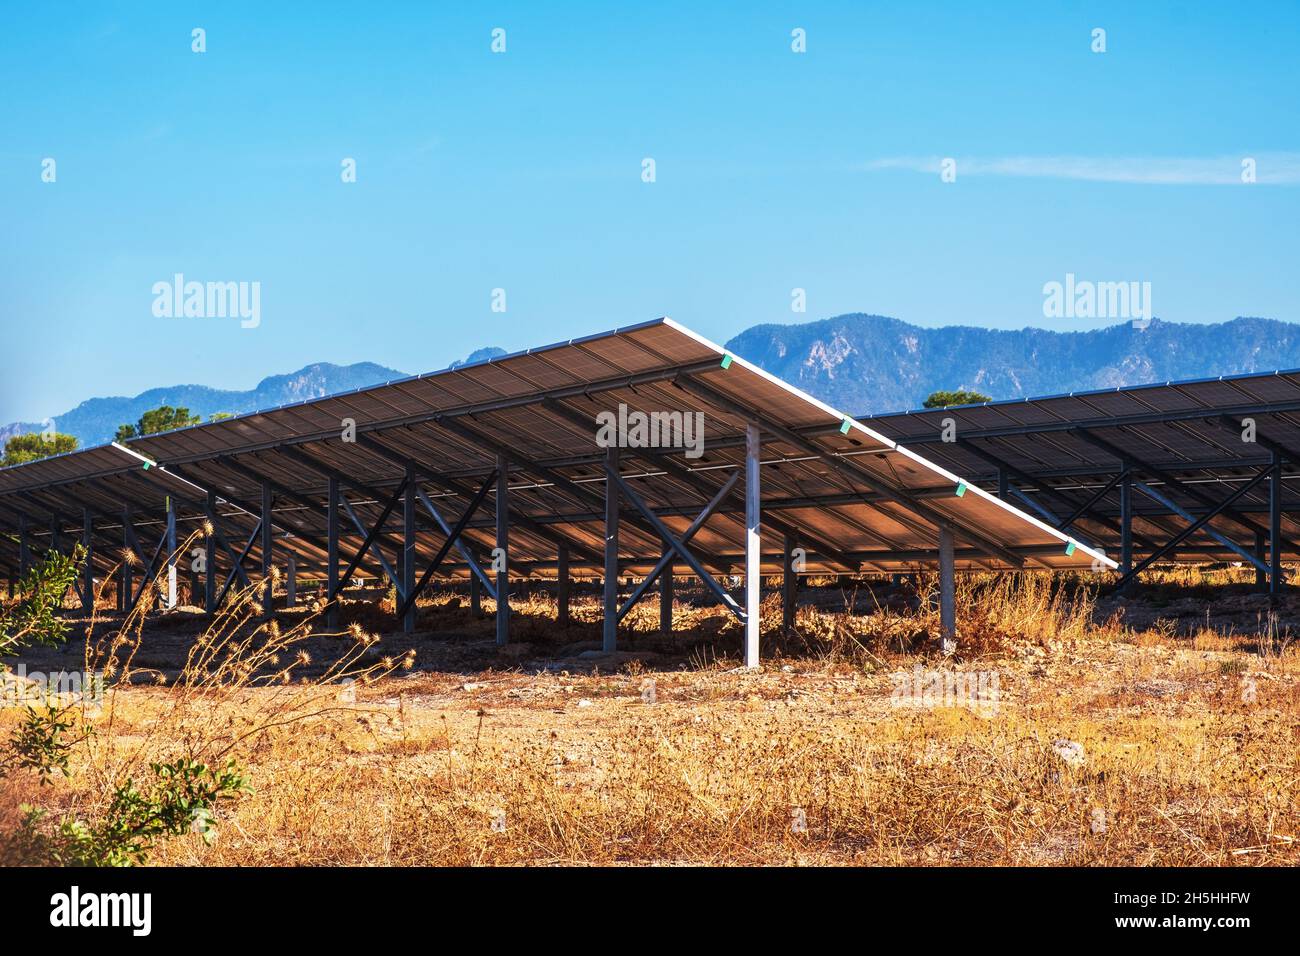 A complex of solar panels for generating electricity. Green energy farm. Background with copy space for text or inscriptions. Ecology concept. Stock Photo